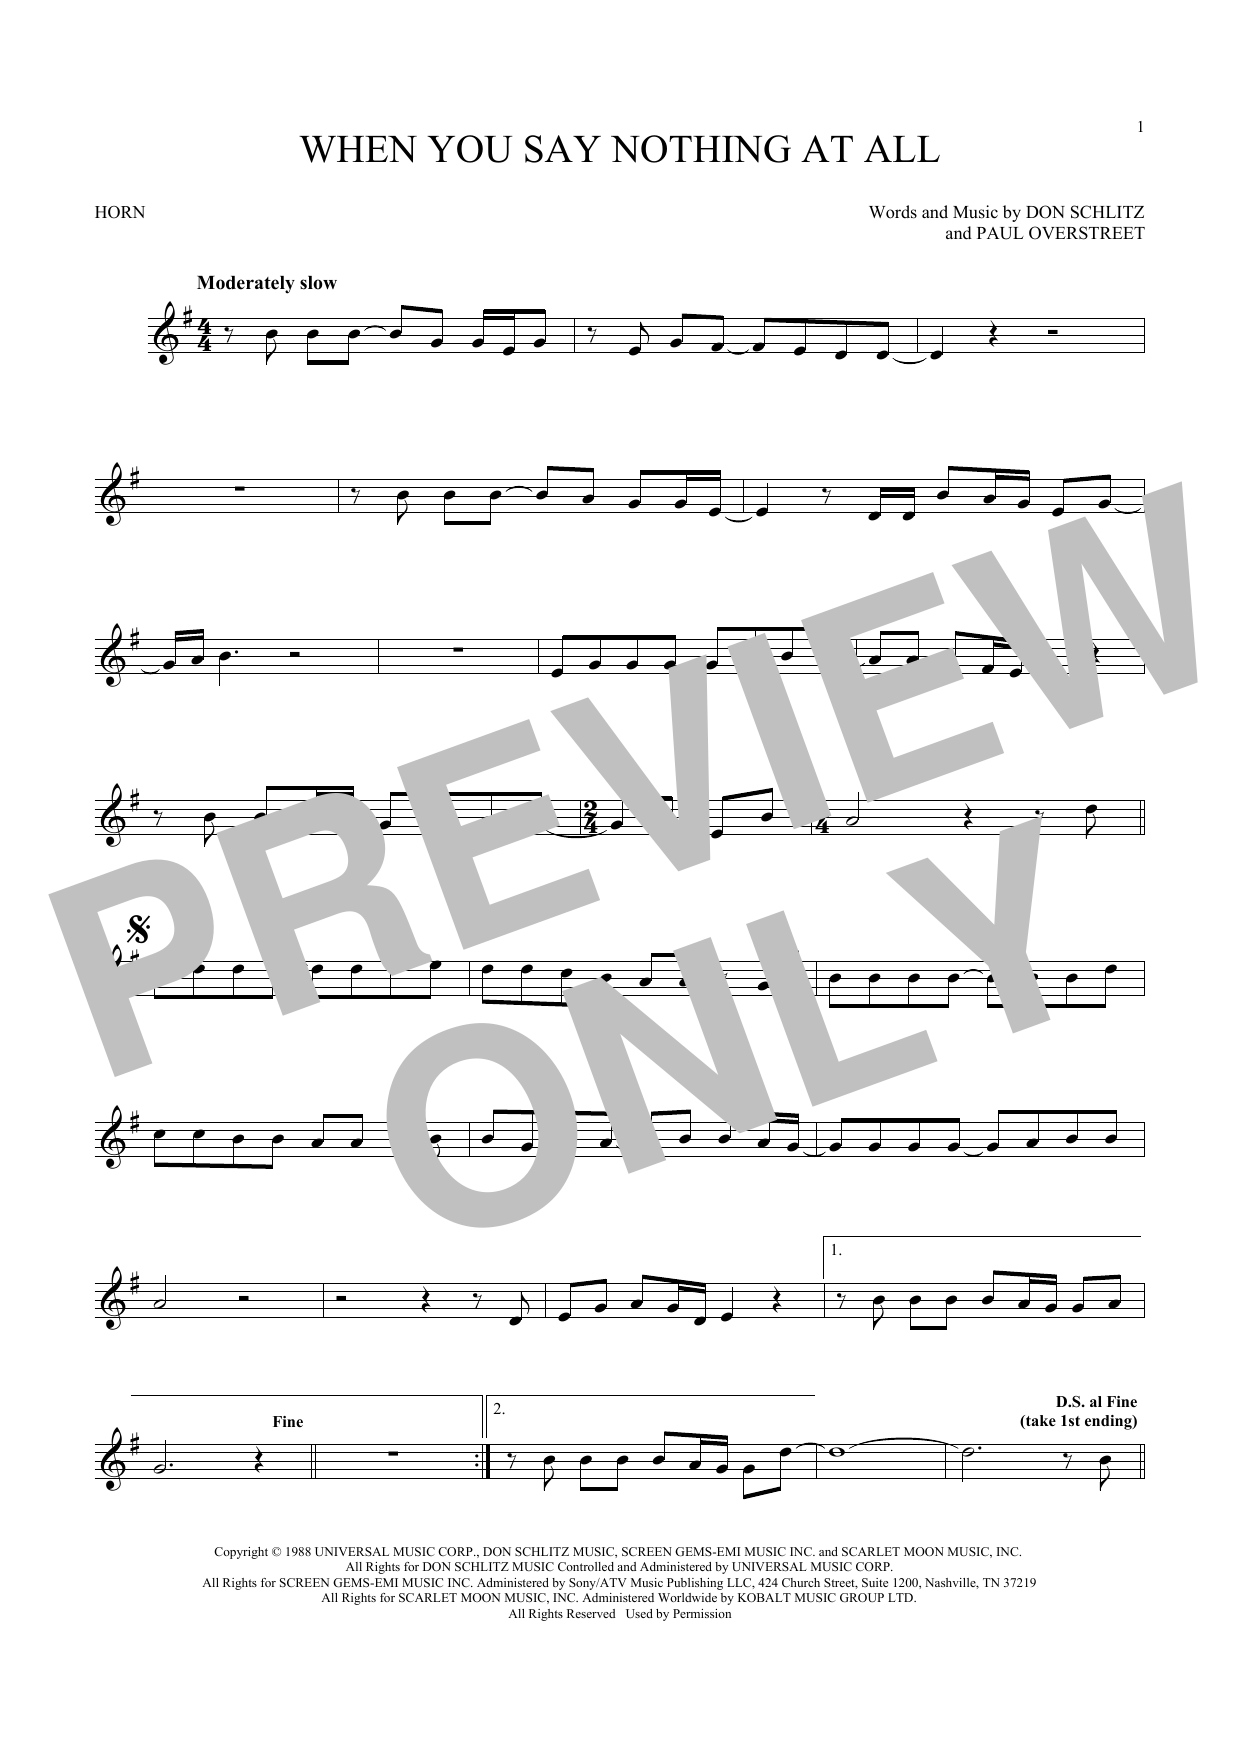 Download Alison Krauss & Union Station When You Say Nothing At All Sheet Music